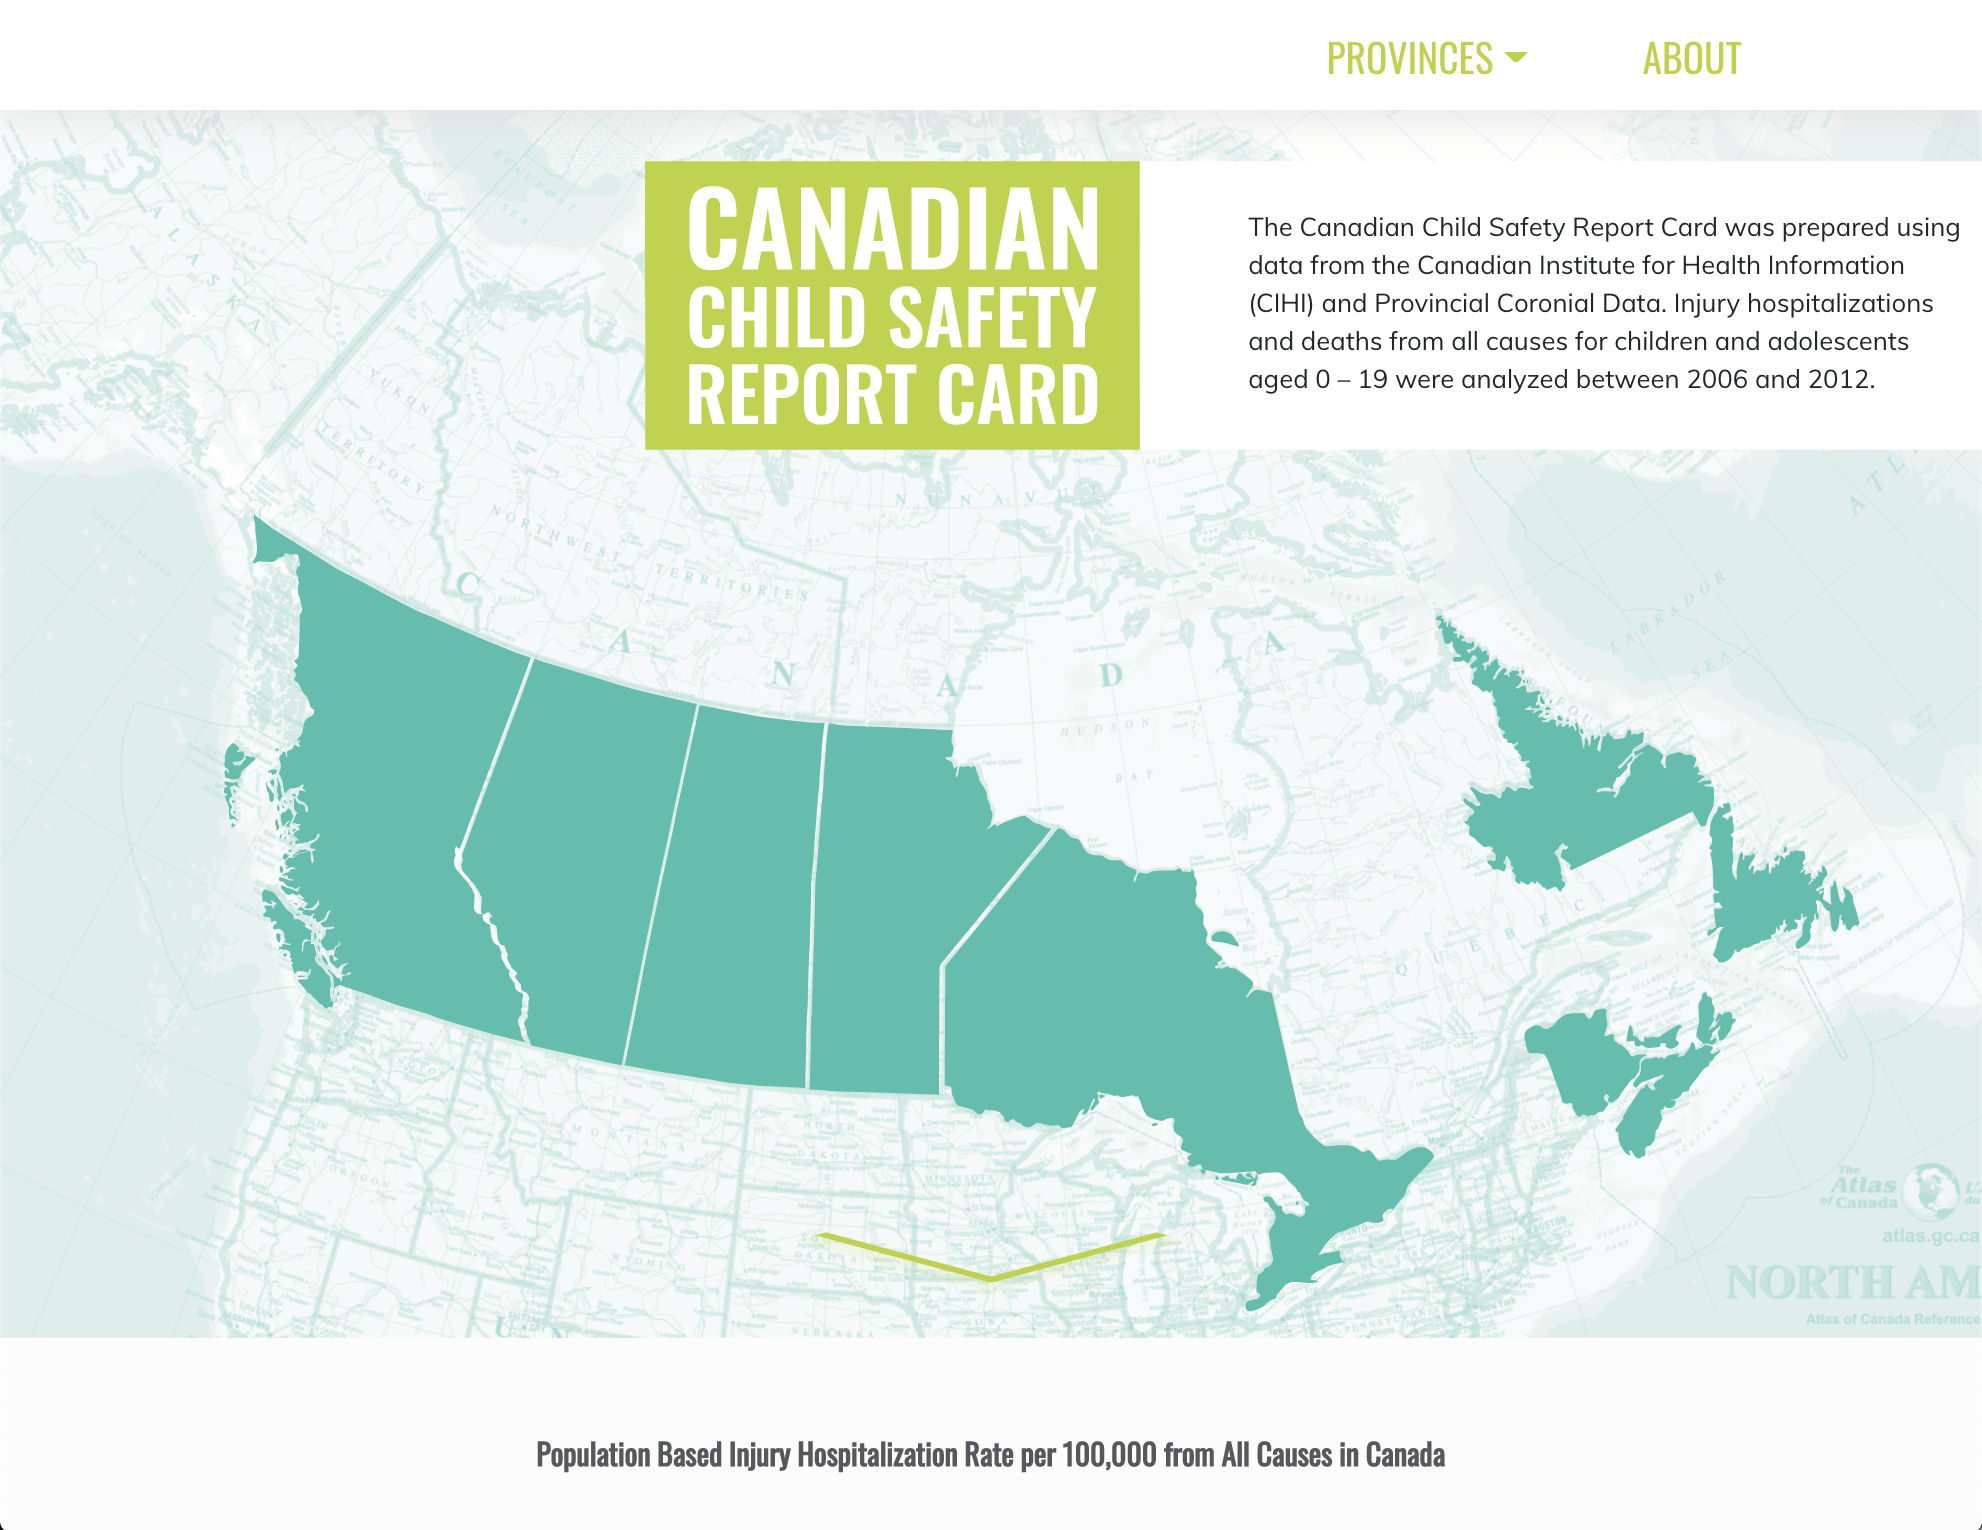 The Canadian Child Safety Report Card website